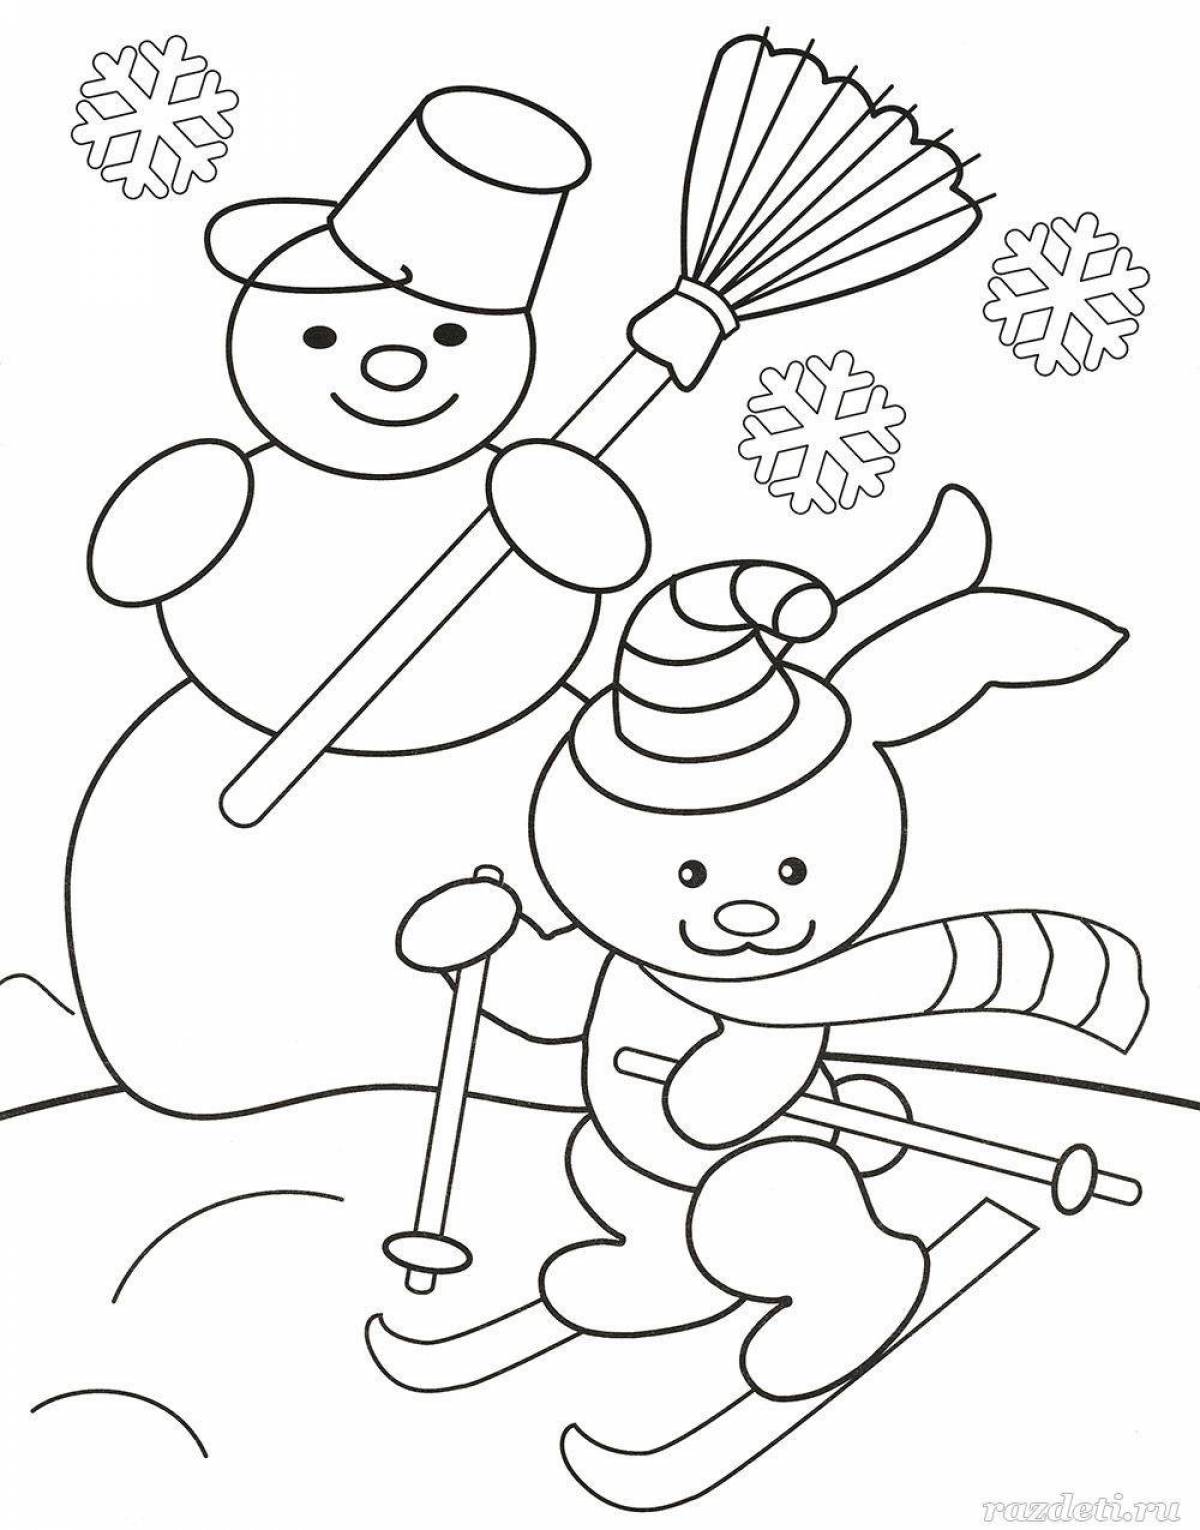 Fun winter coloring book for 4-5 year olds